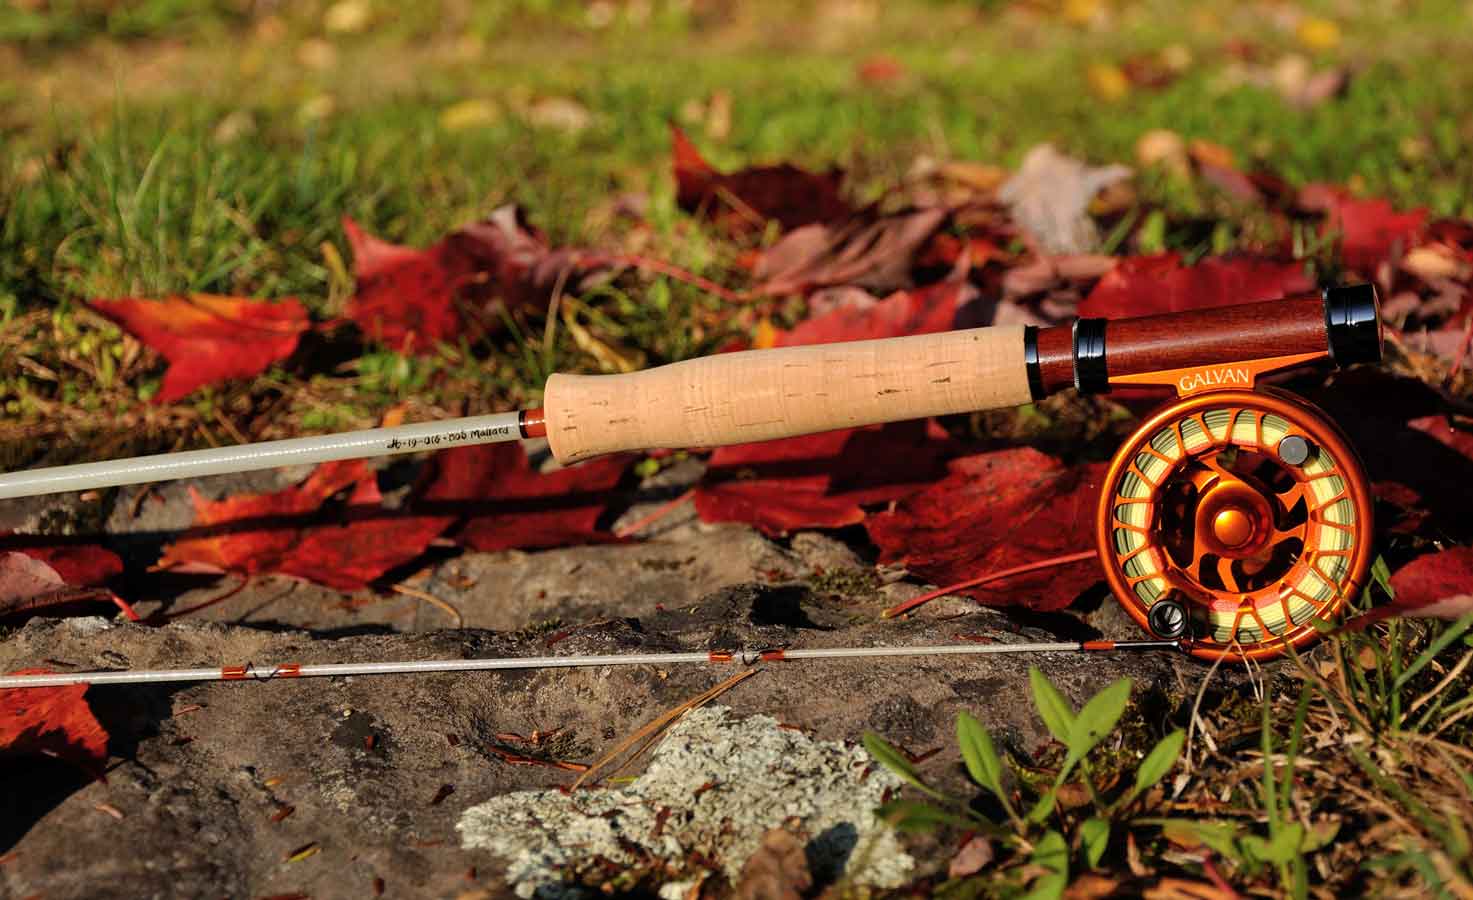 Classic rod, new reel?  Collecting Fiberglass Fly Rods